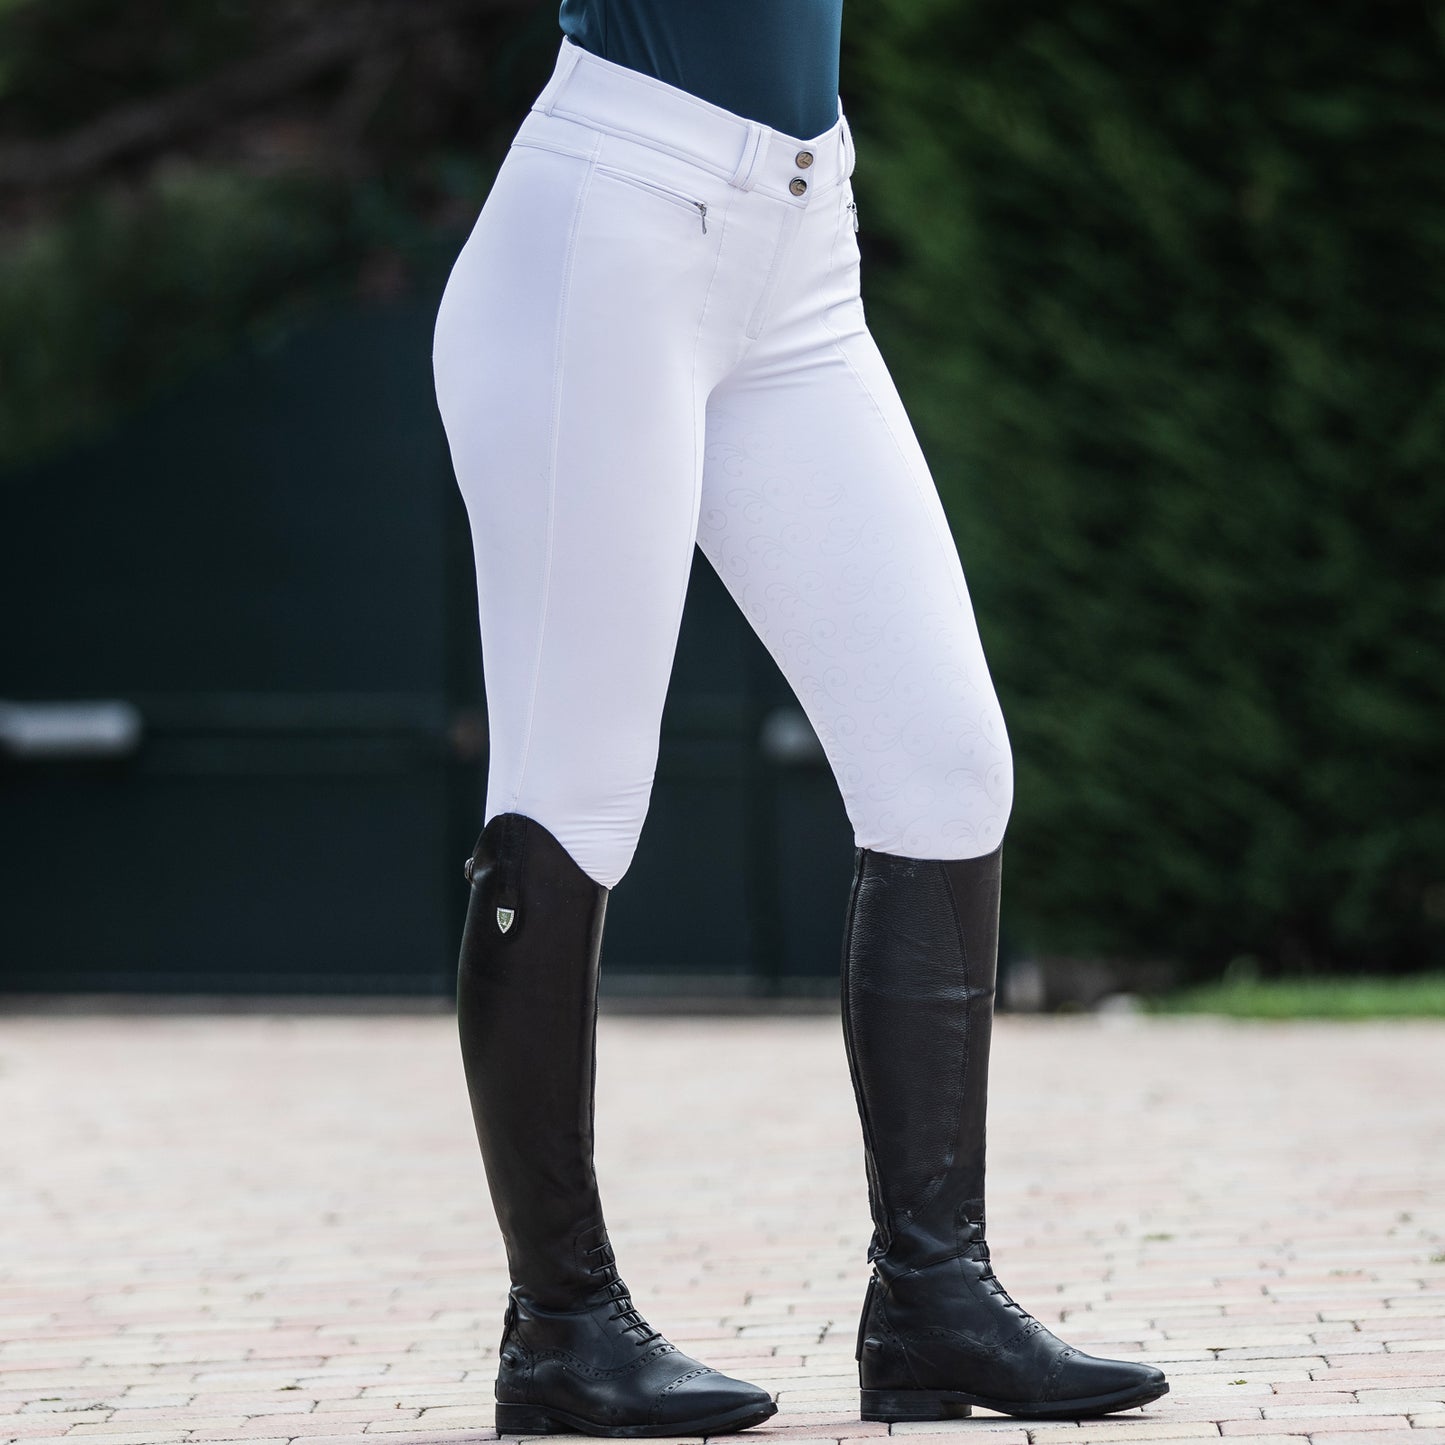 Horze Angelina Womens Silicone Full Seat Breeches